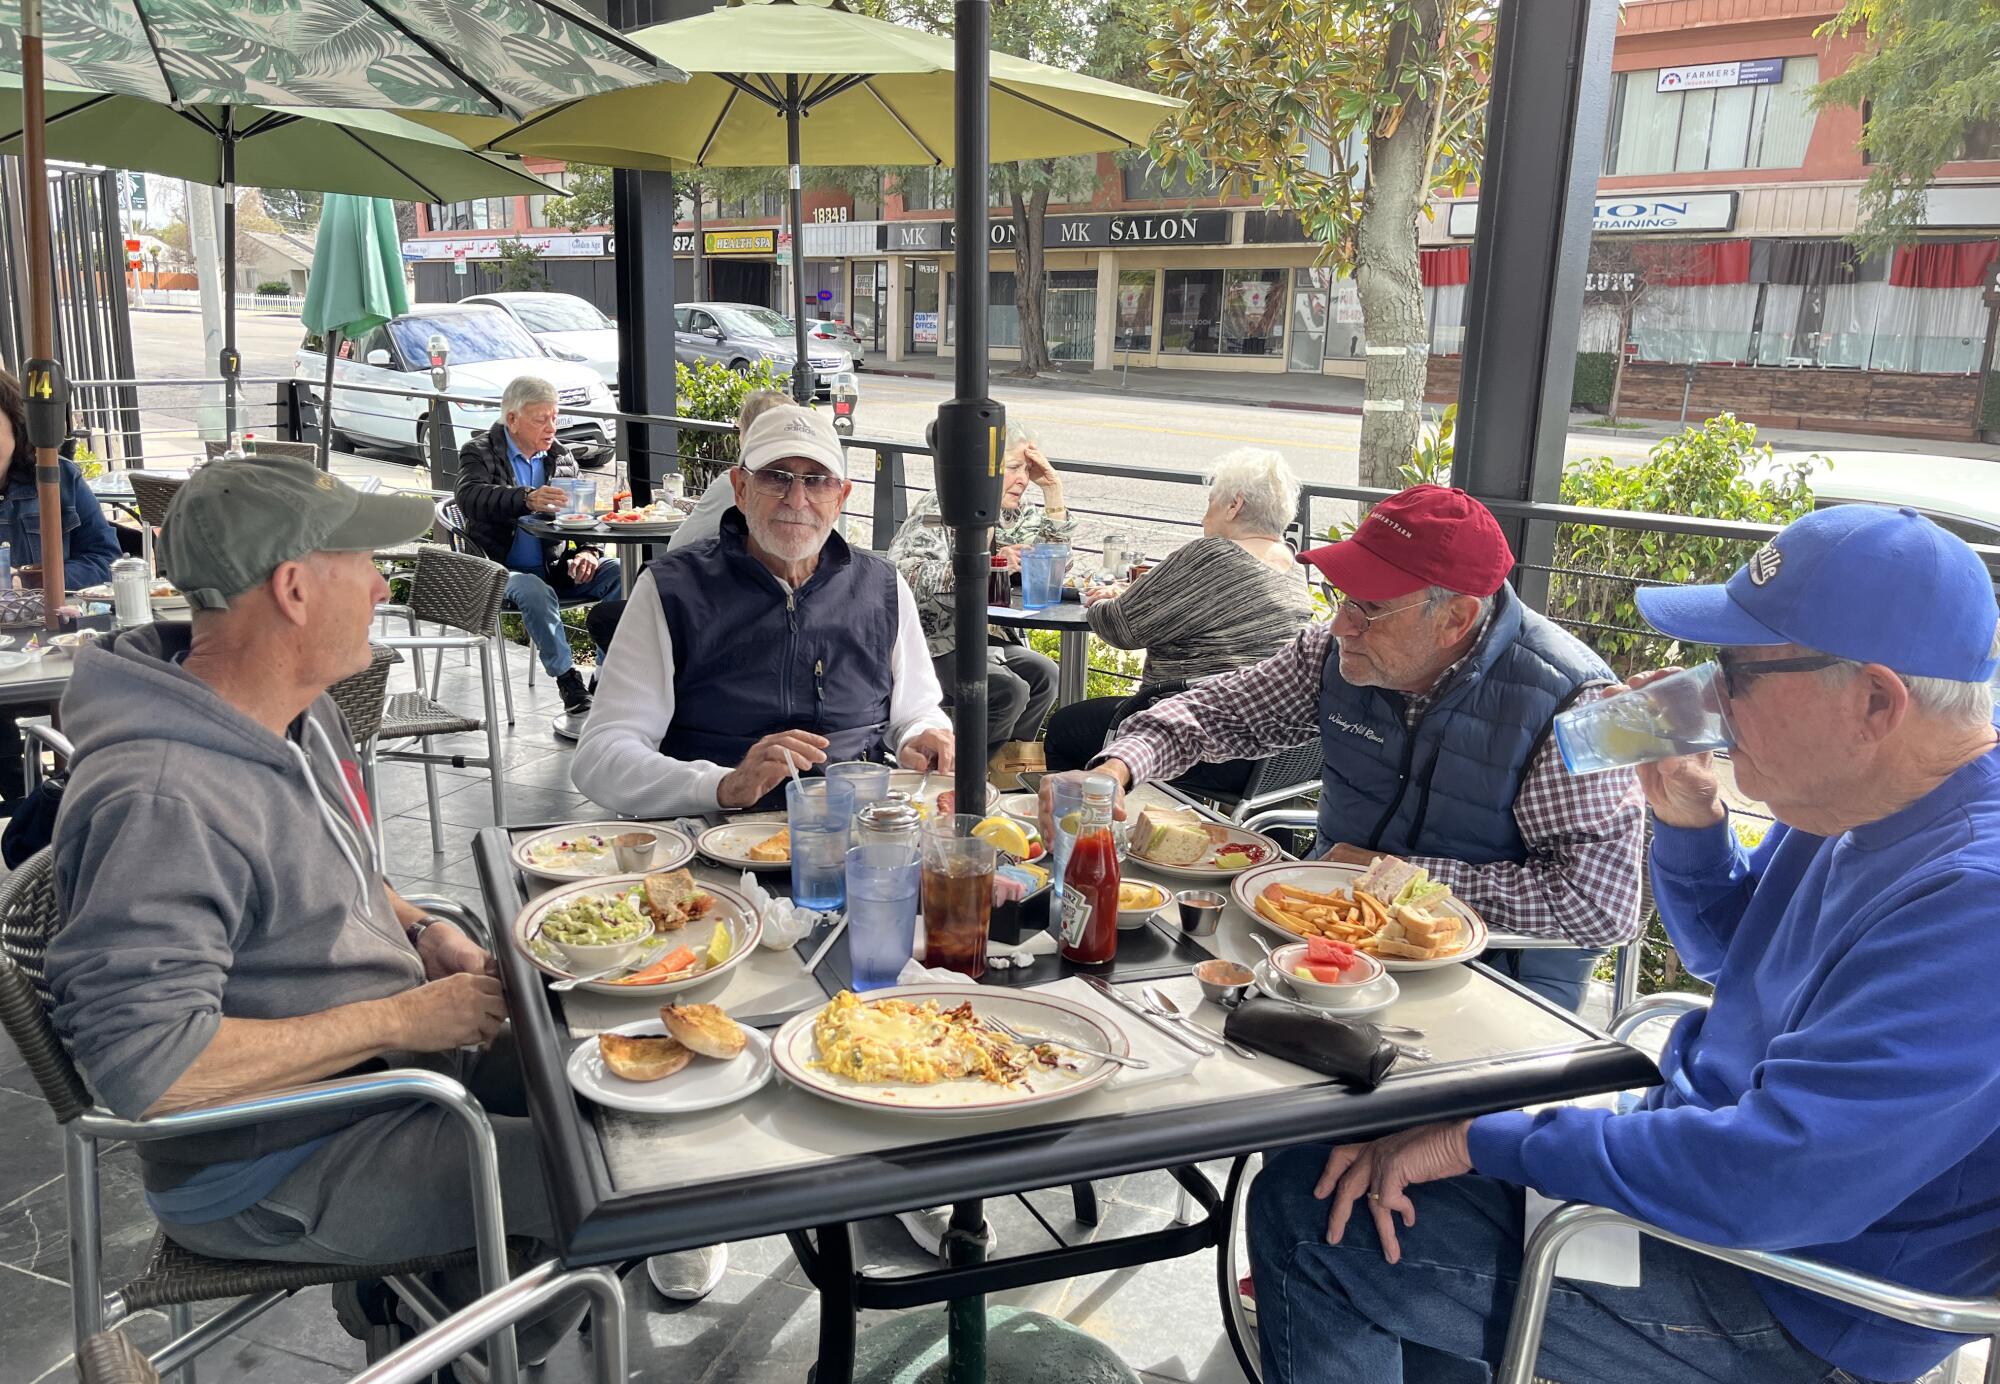 From left, Jonathan Curtiss, Jerry Nussbaum, Les Steier and Dave Gurian have lunch at VIP's Cafe in Tarzana.